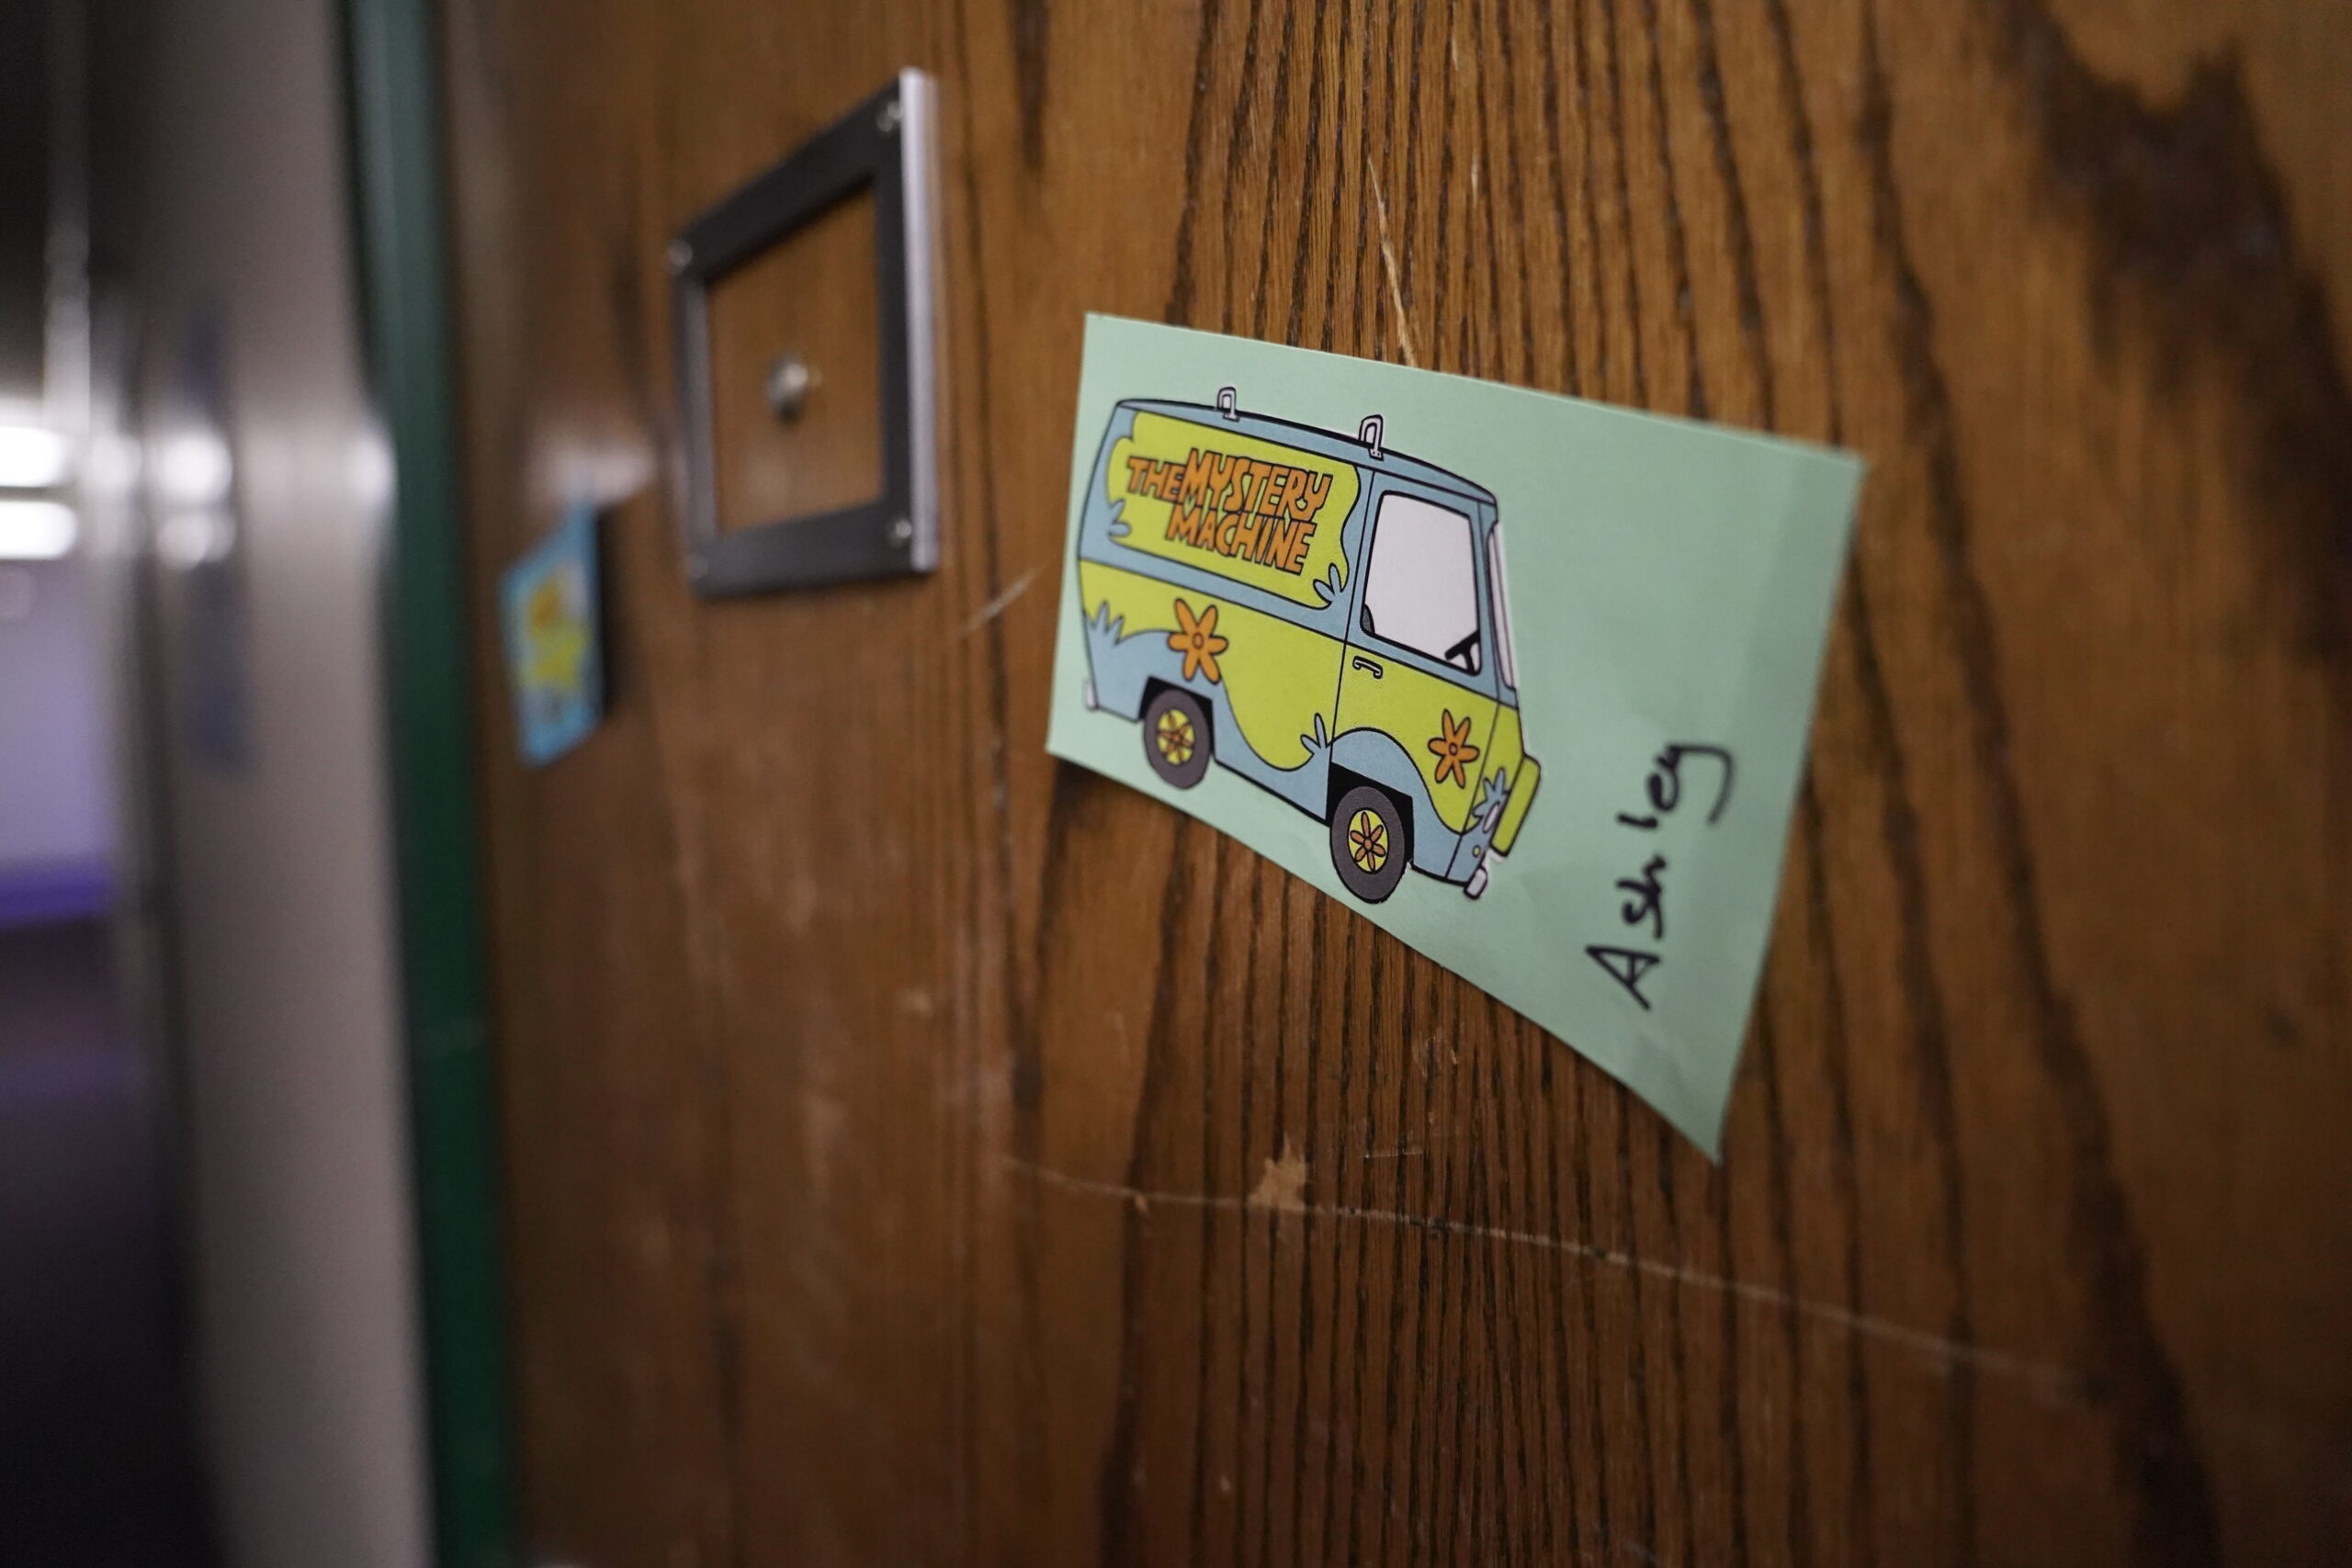 A Scooby-Doo-themed door decal welcomes a student into her new room inside Tamarack Hall during move-in day on campus on Thursday, Aug. 17, 2023. (Micah Friez / Bemidji State)